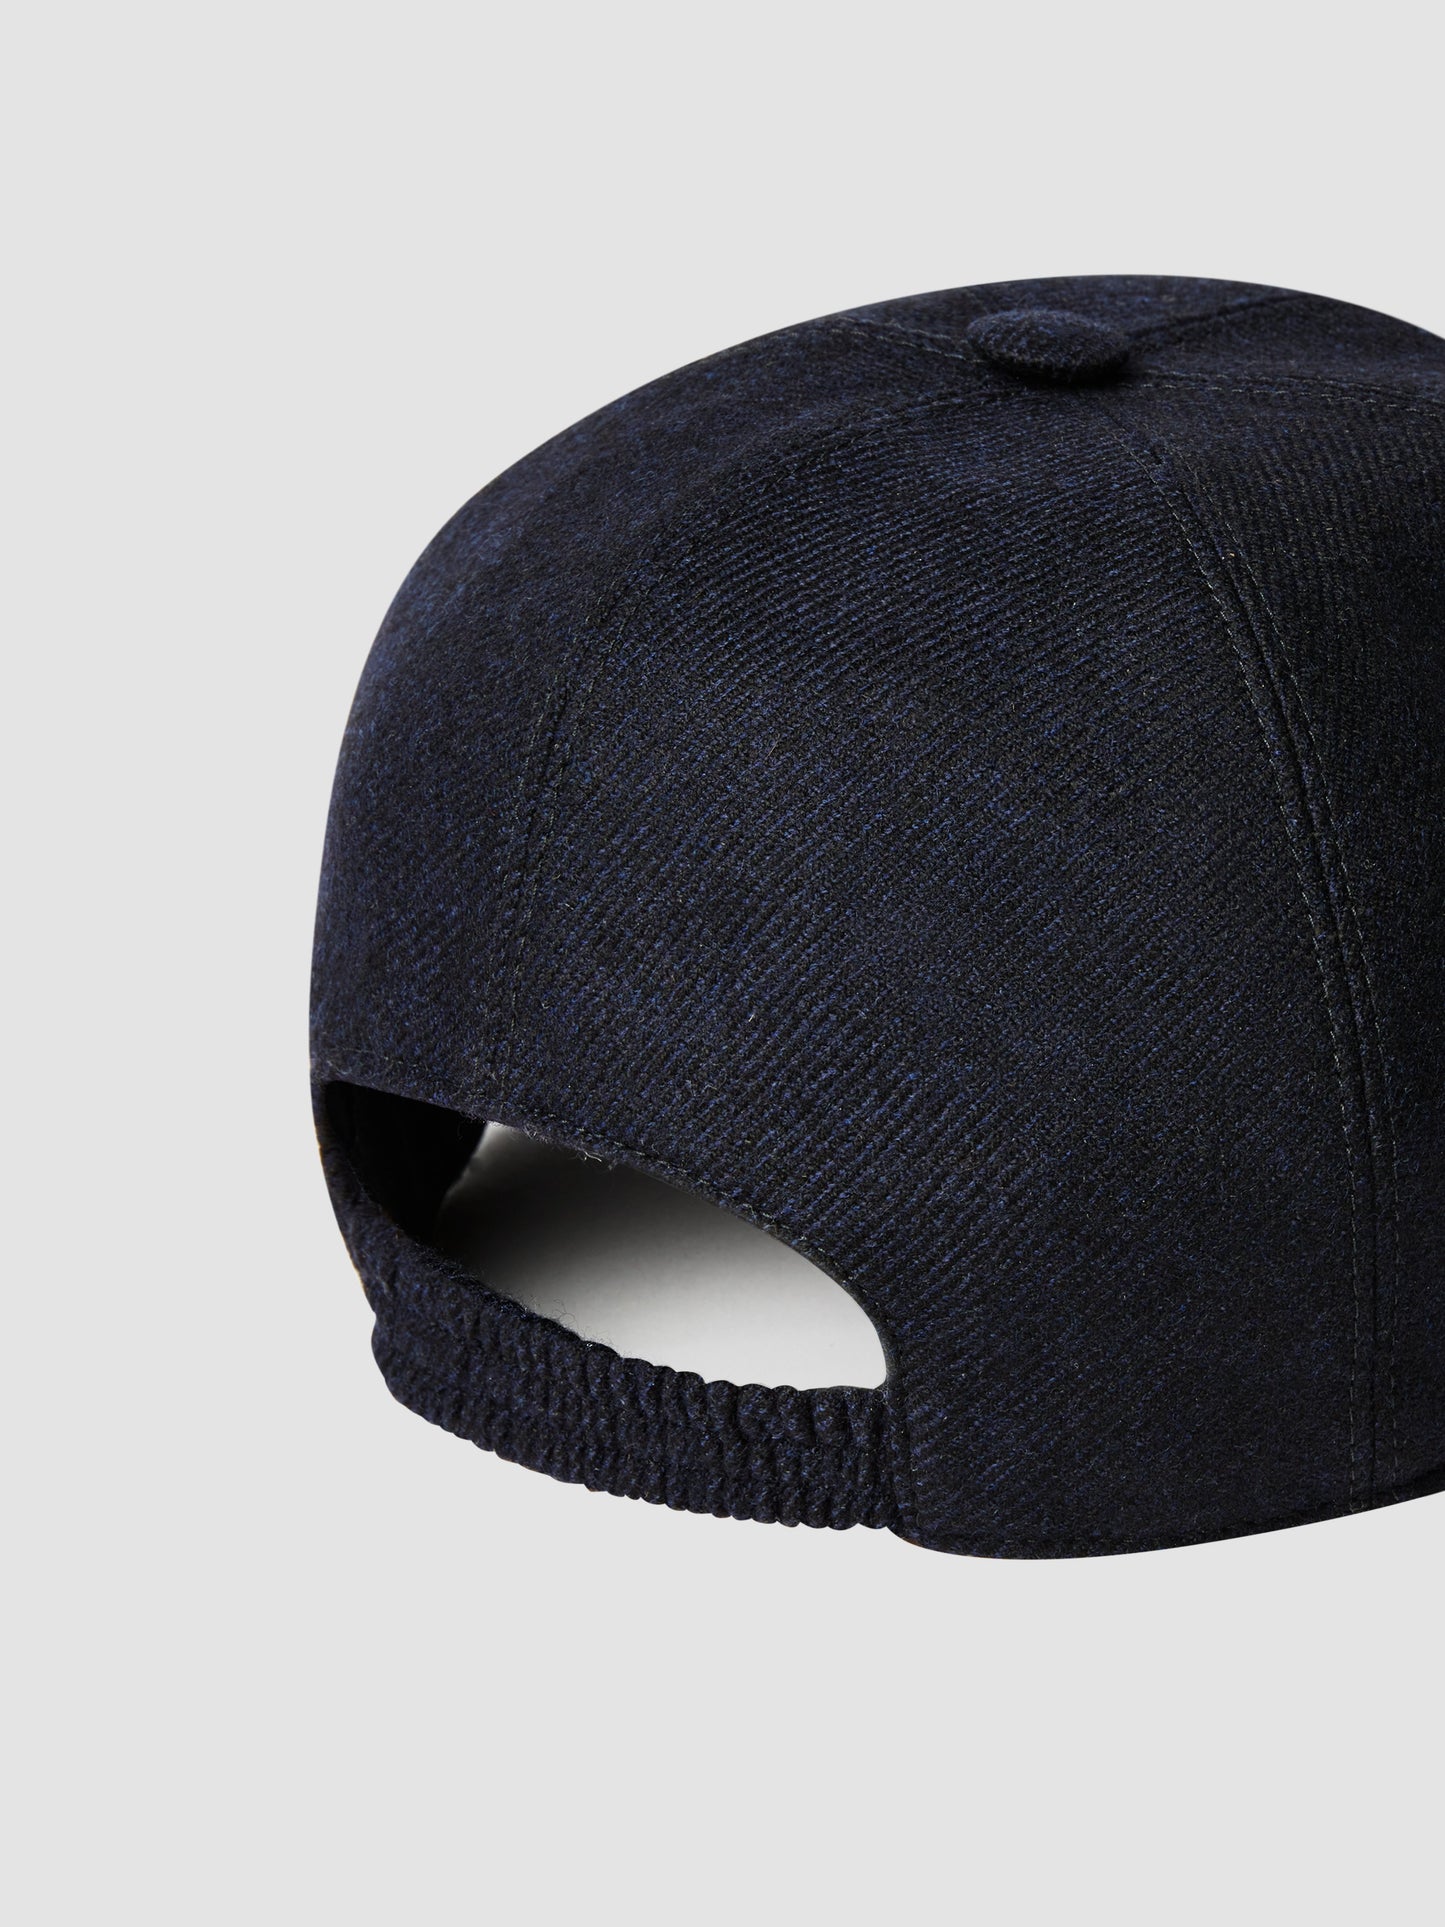 Wool Cashmere Blend Cap Navy Product Image